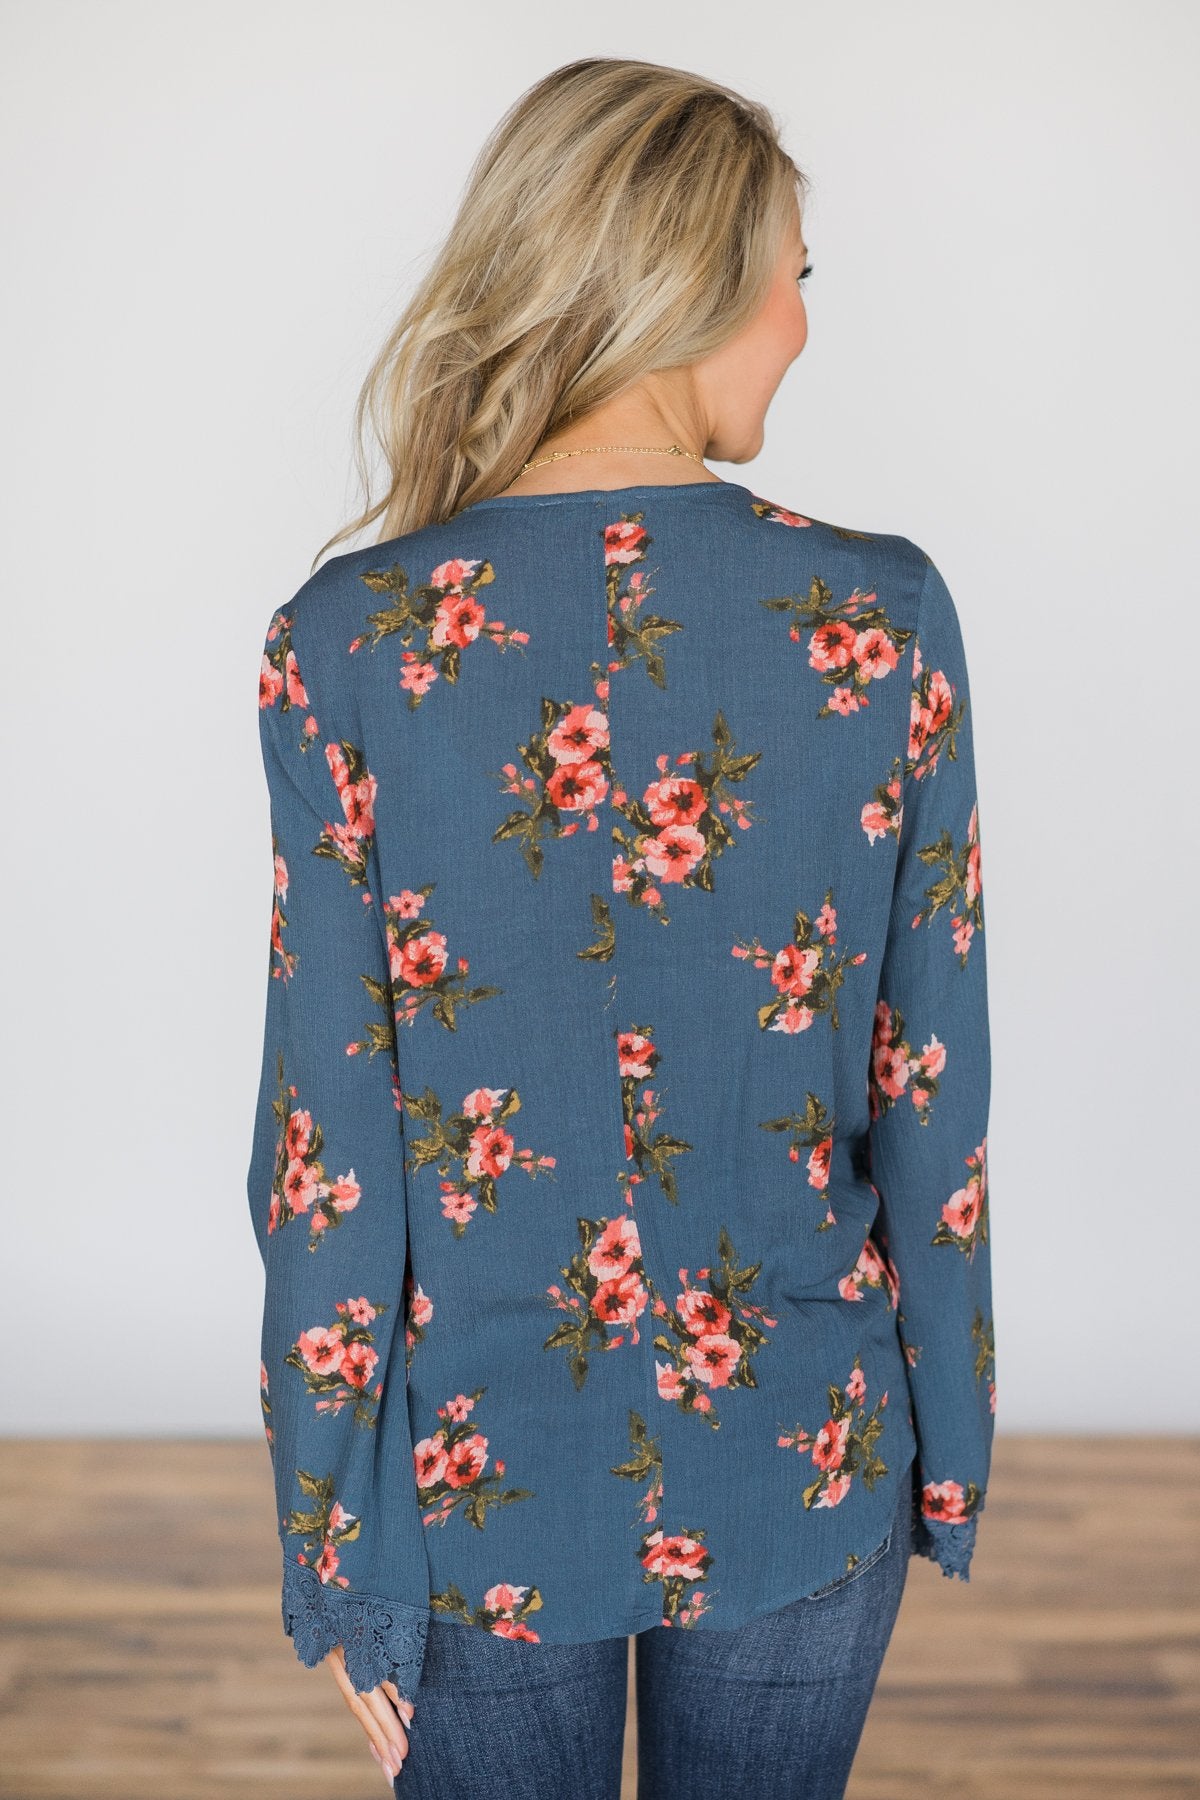 One Last Change Floral Top